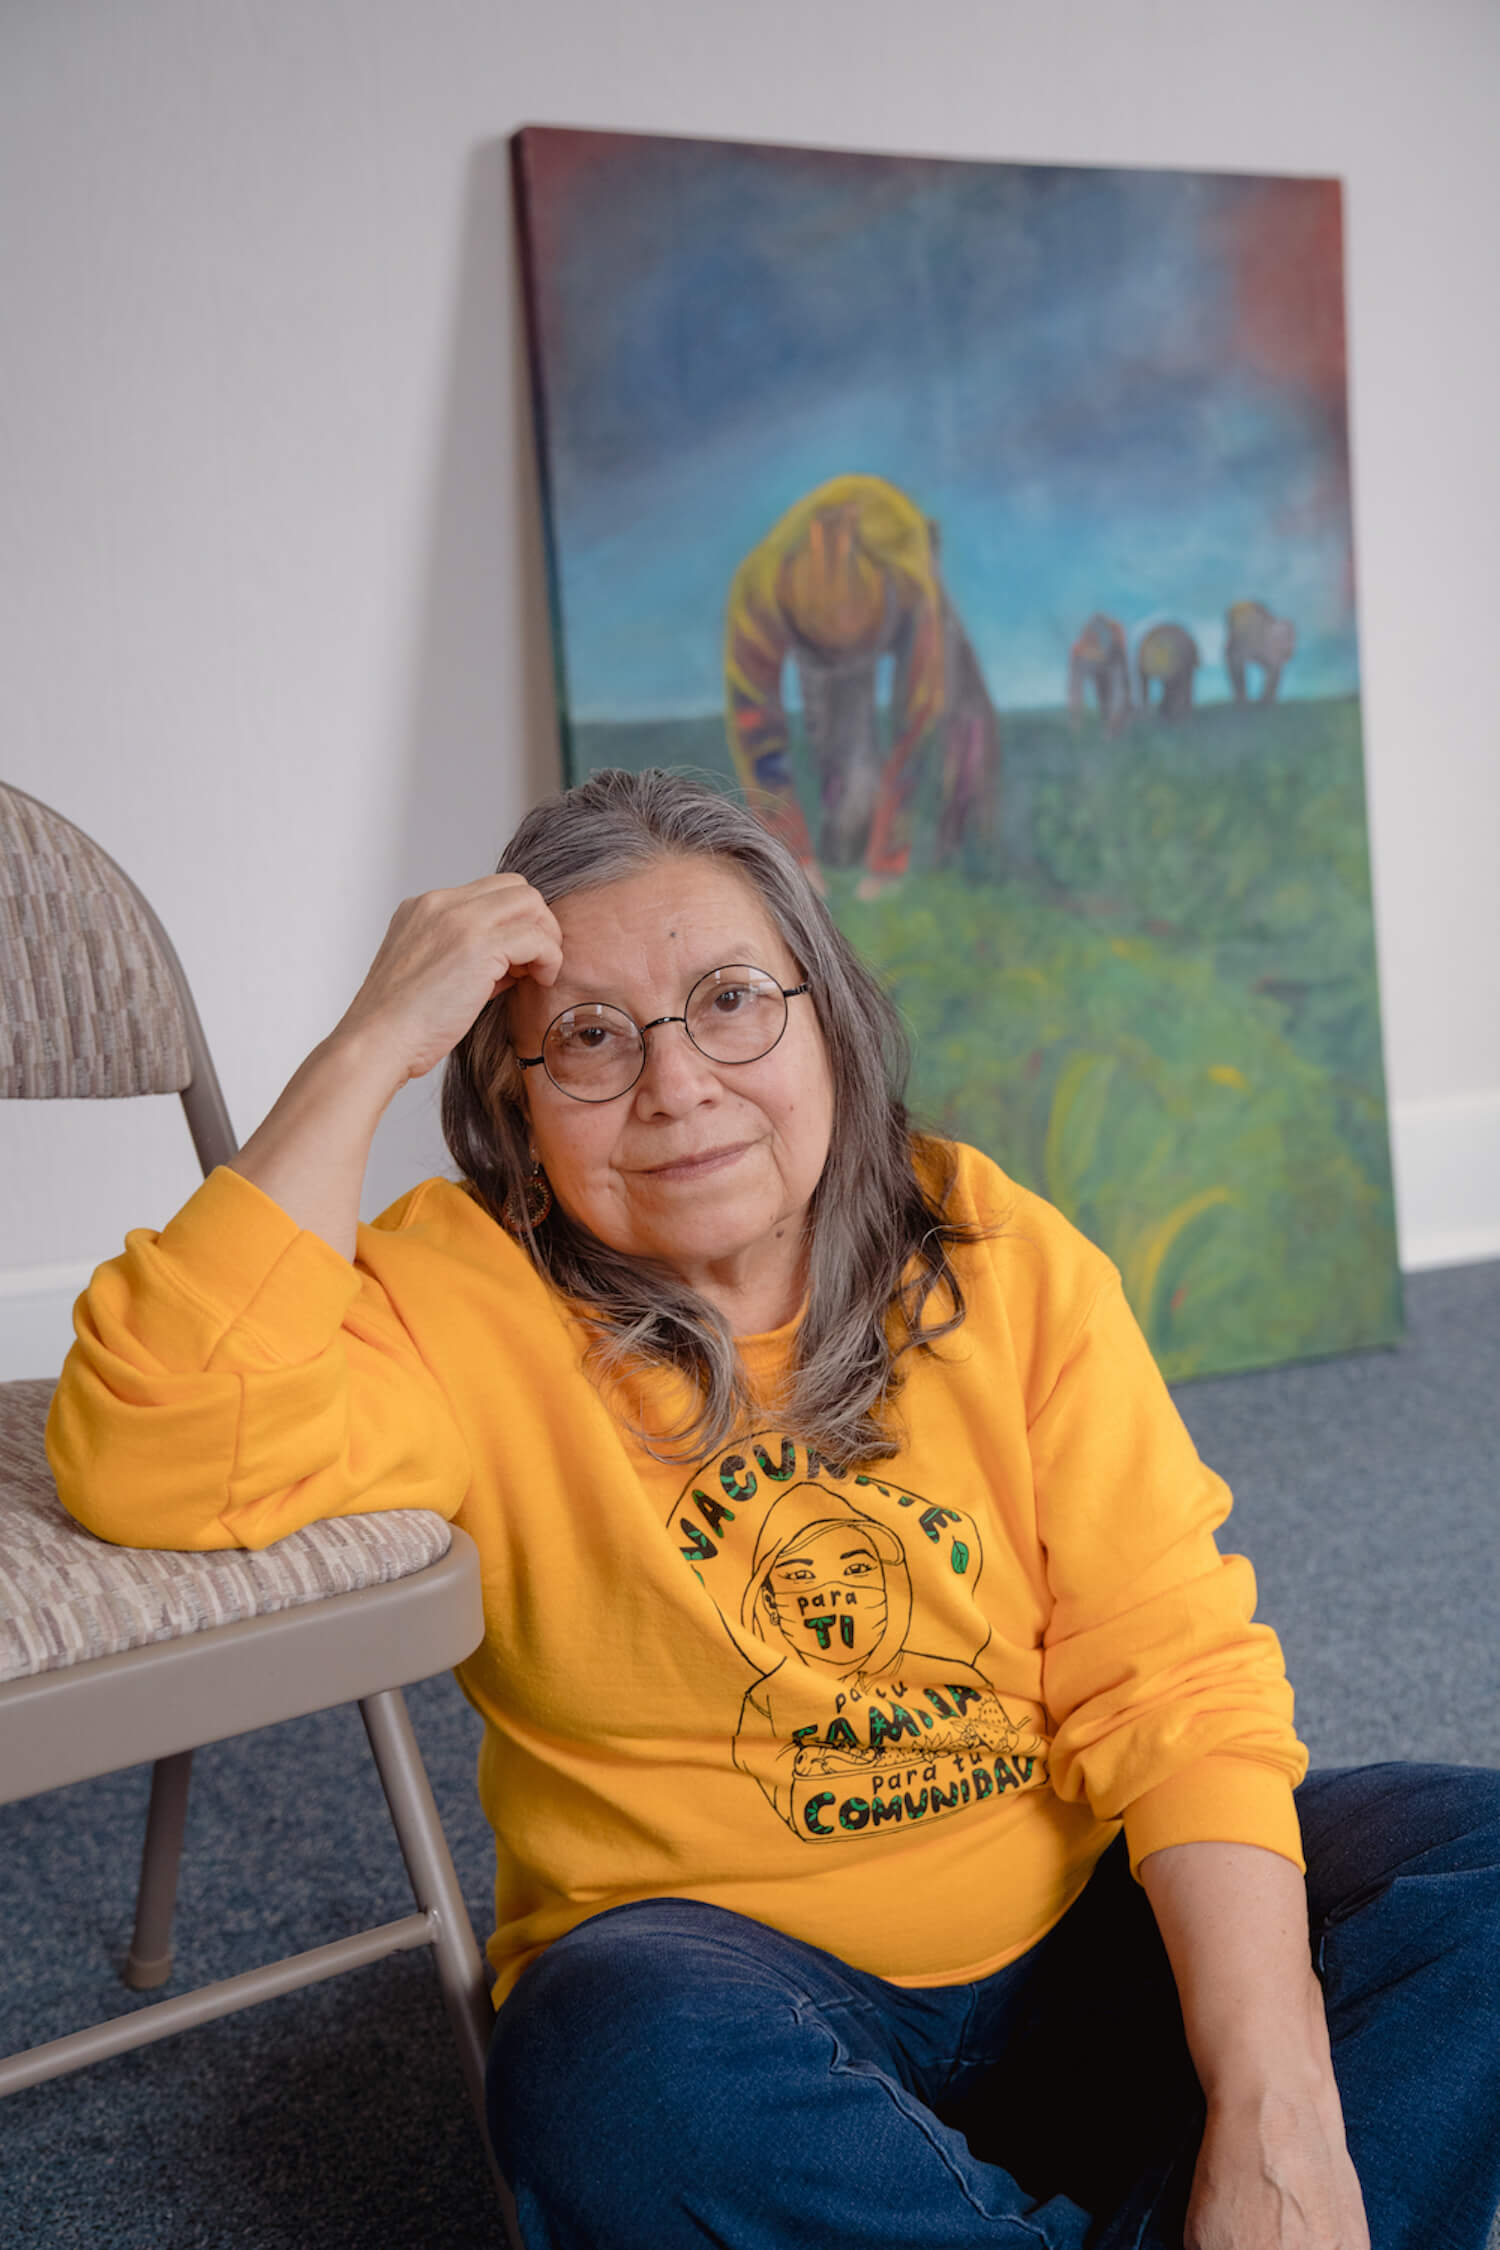 Rosalinda Guillén, a farmworker advocate, community organizer and founder of Community-to-Community Development, with one of her brother Miguel’s paintings at the C2C office in Bellingham, Washington. February 2022